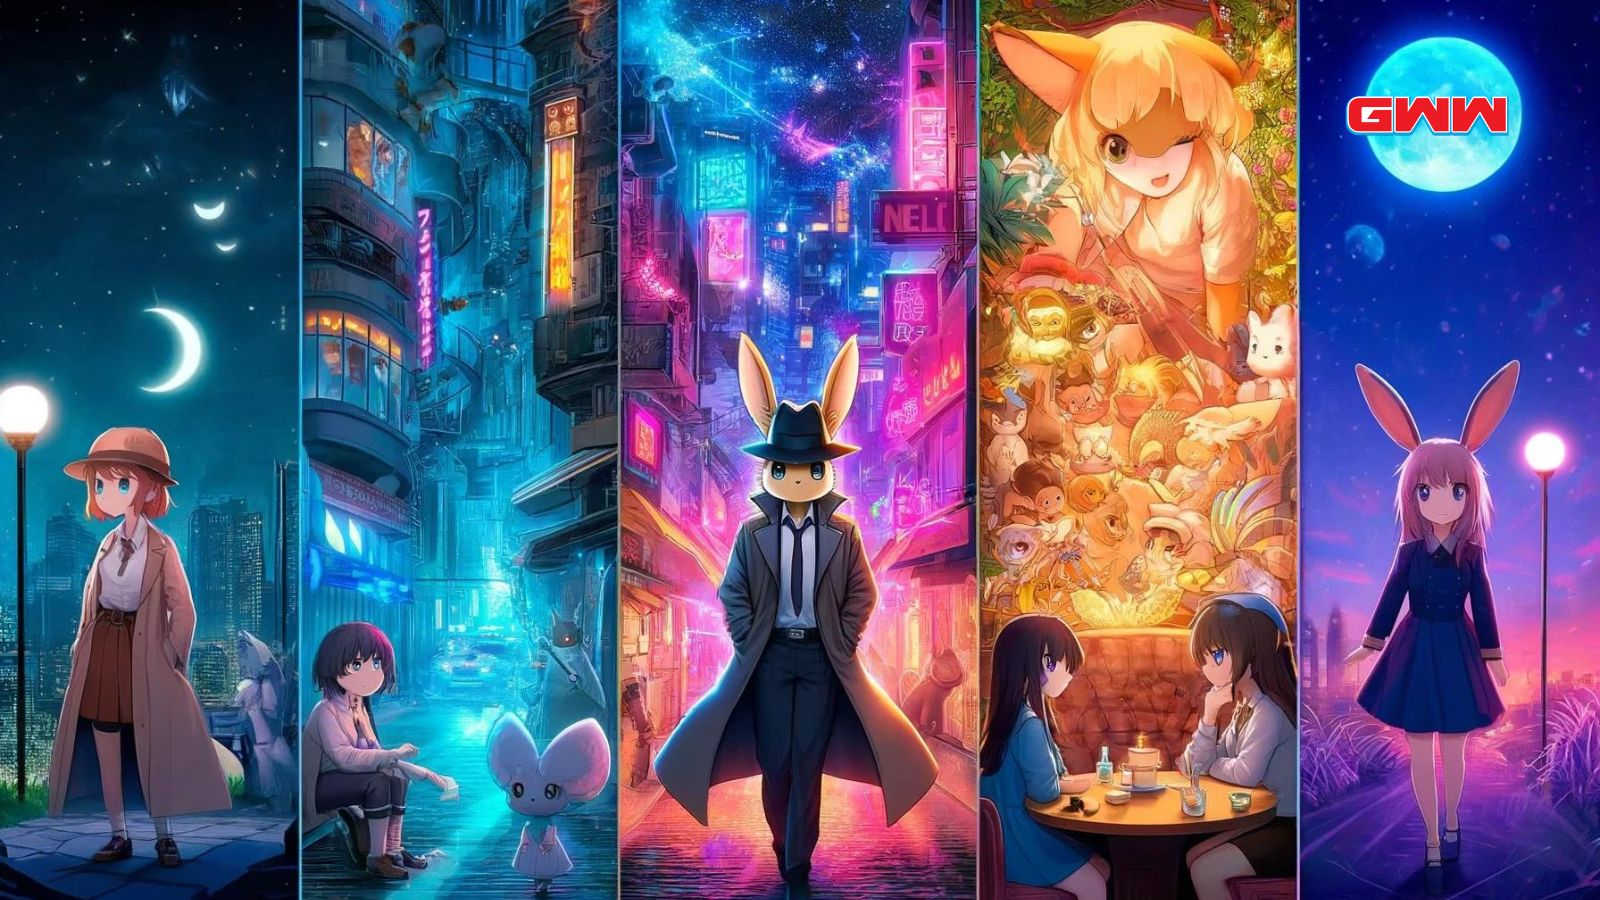 An anime-style illustration that creatively visualizes different anime genres within a city inhabited by anthropomorphic animals.